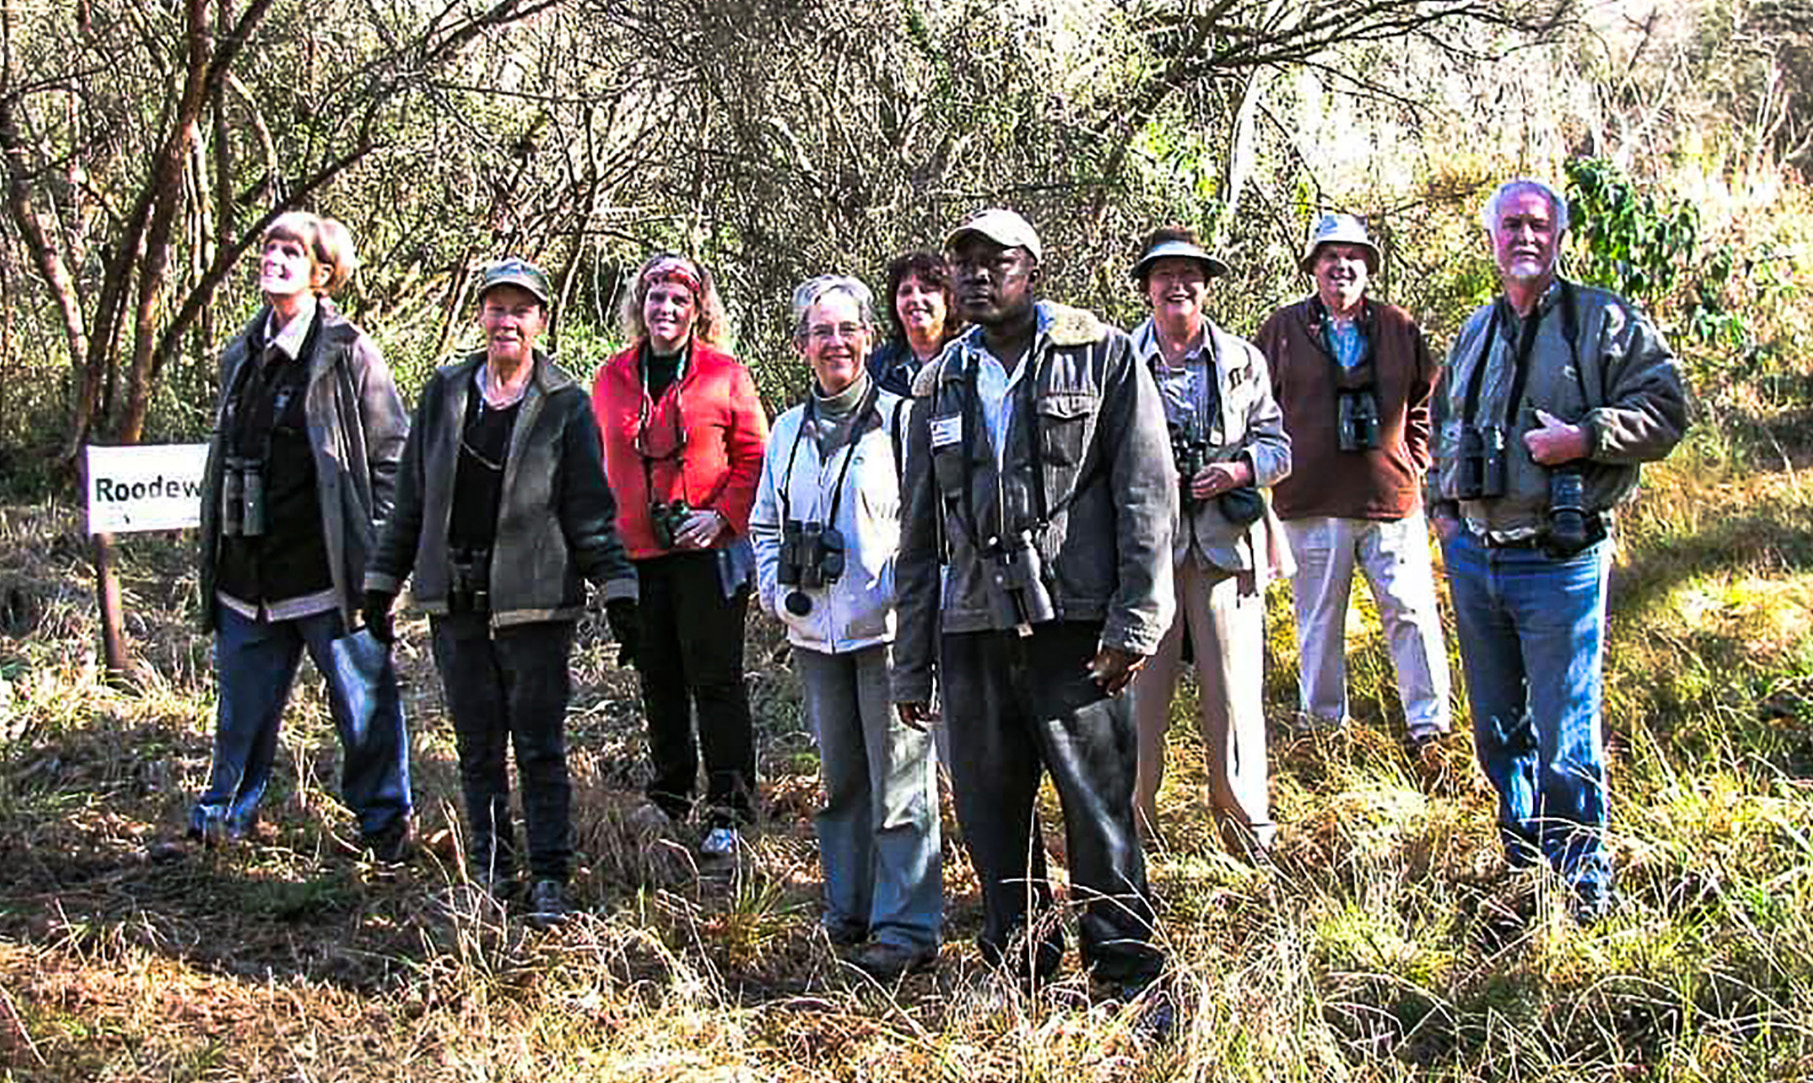 Bird guide Samson Mulaudzi exploring a wooded area with guests